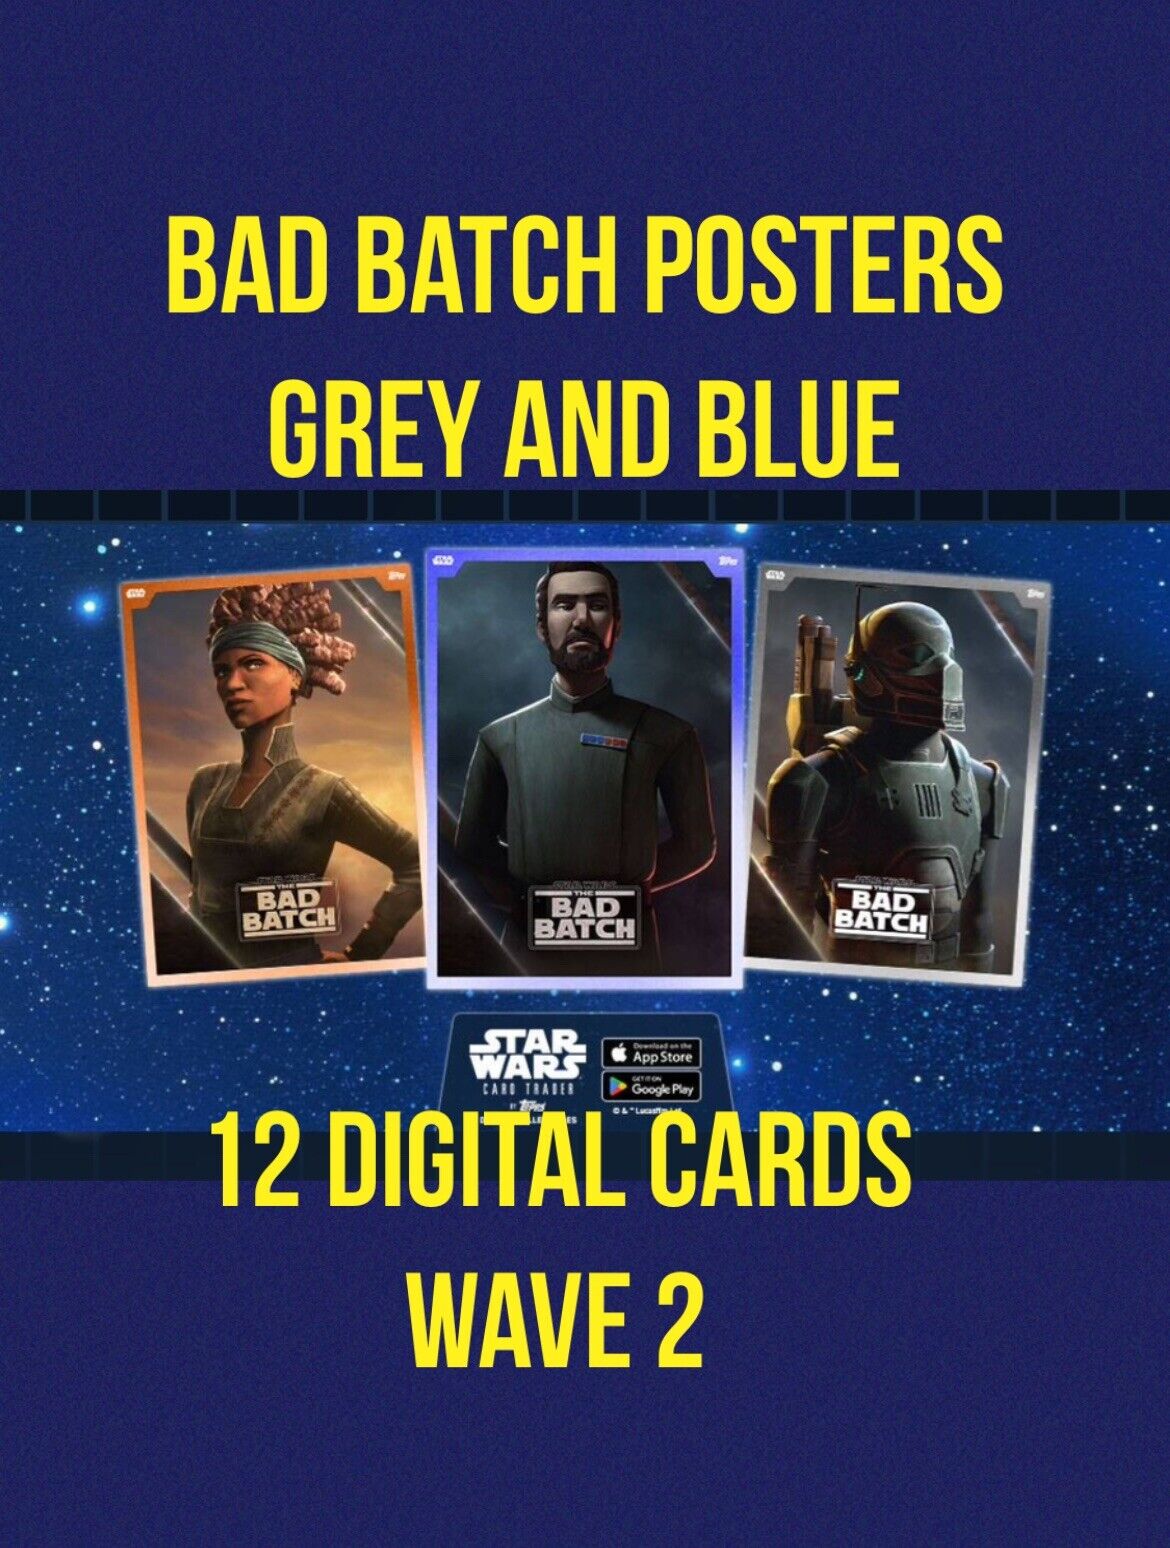 topps star wars card Trader BAD BATCH POSTERS WAVE 2 GREY AND BLUE 12 Card